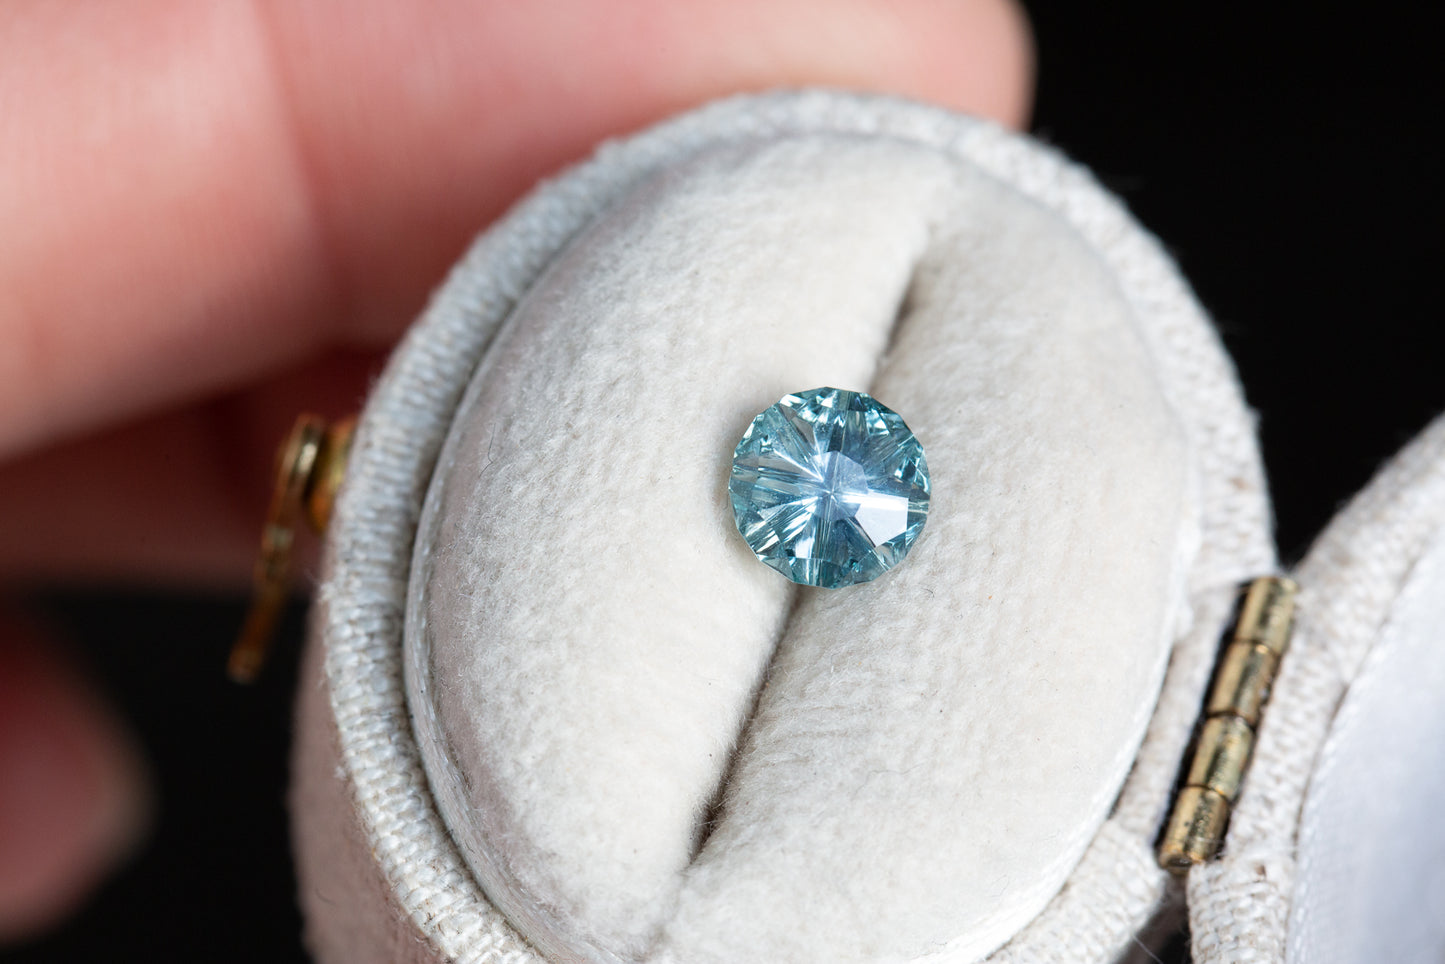 .94ct round teal blue sapphire - Starbrite cut by John Dyer